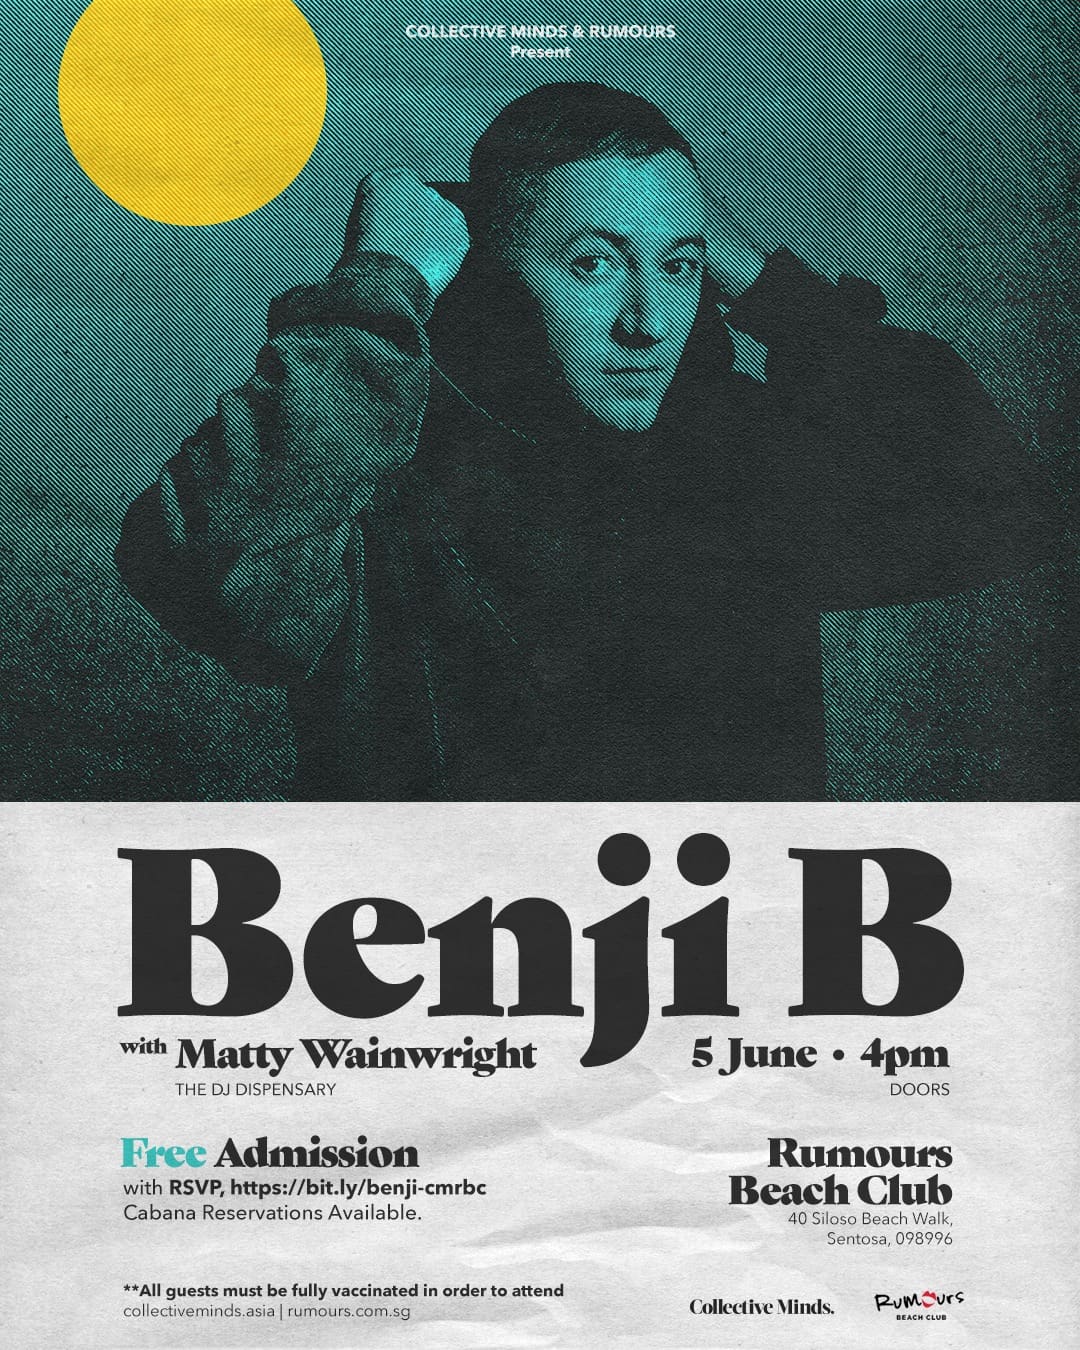 Famous DJ Benji B will be spinning at Rumours Beach Club this Sunday 5 June  4pm! - City Nomads